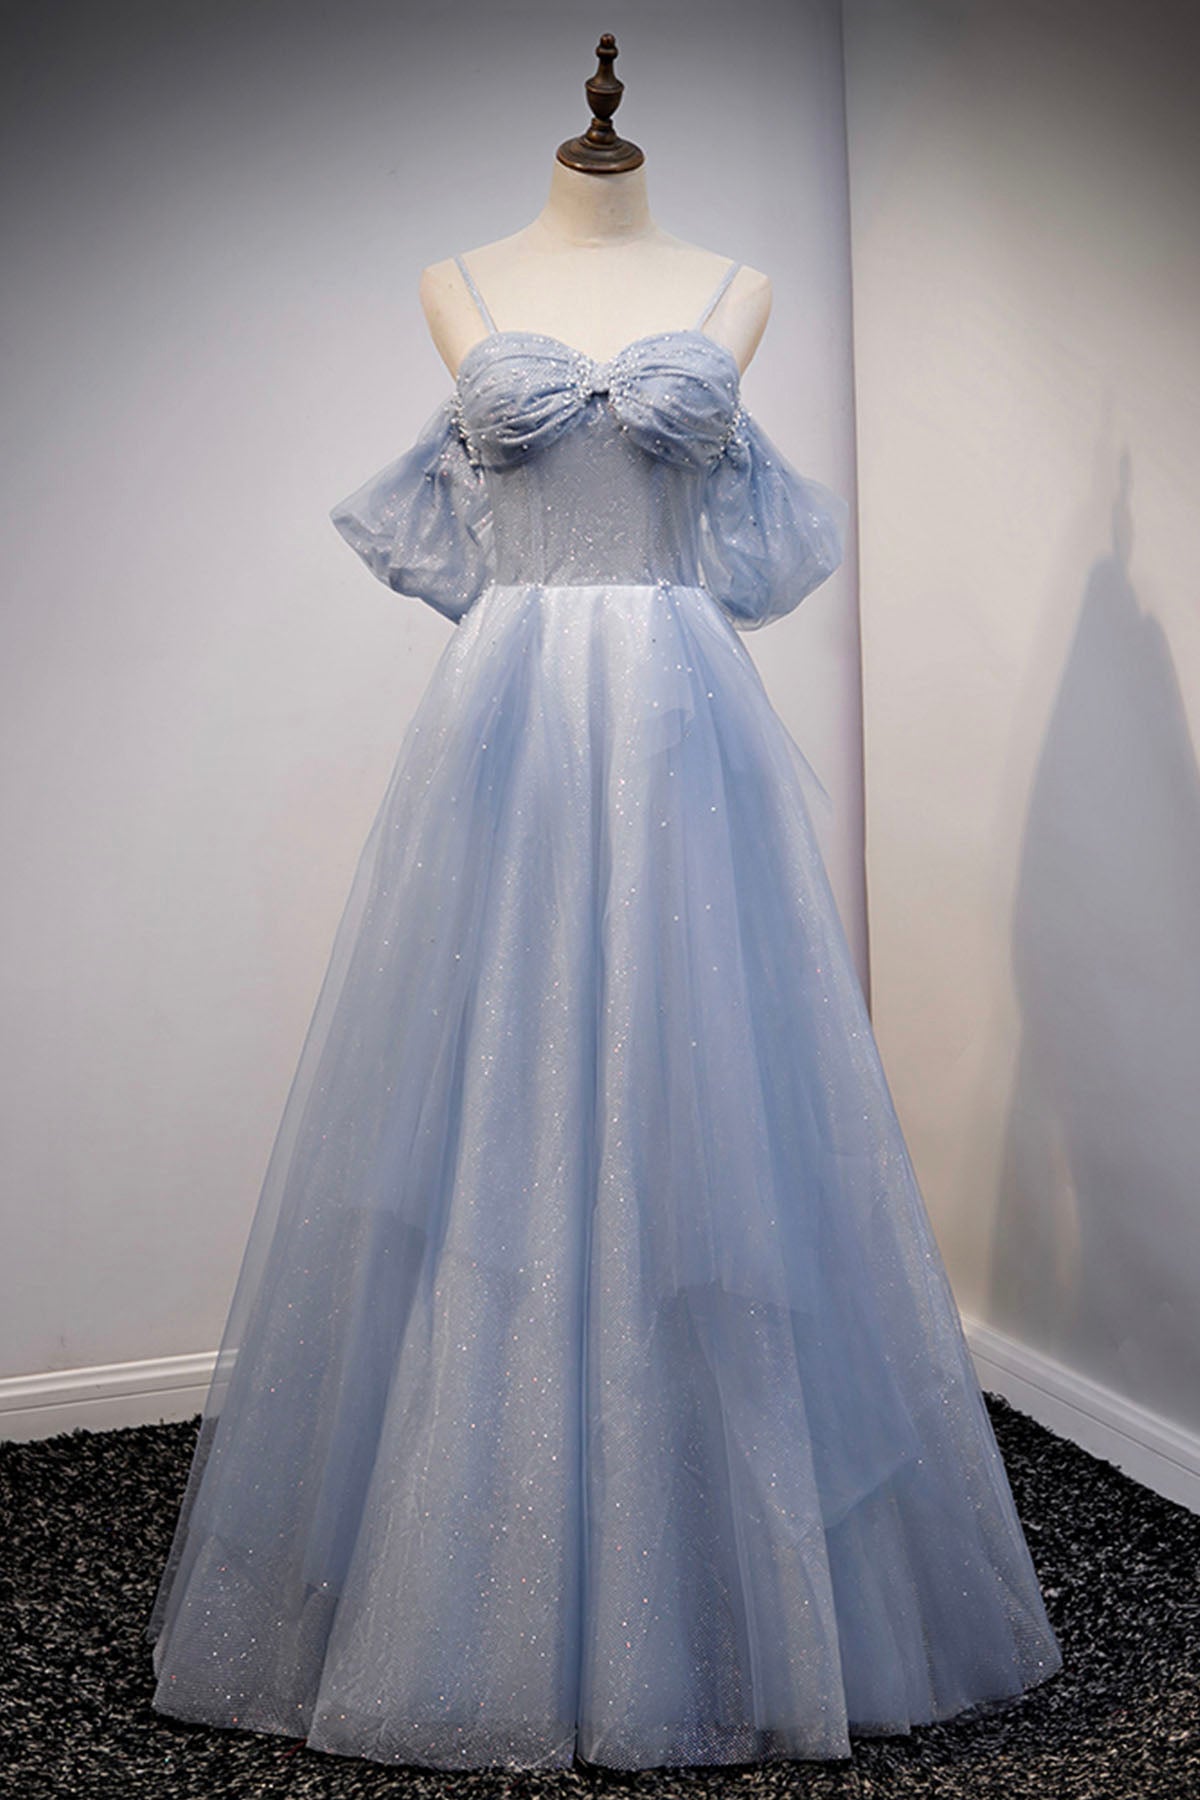 Party Dress Big Size, Spaghetti Straps Blue Tulle Long Prom Dress, Off the Shoulder Evening Dress